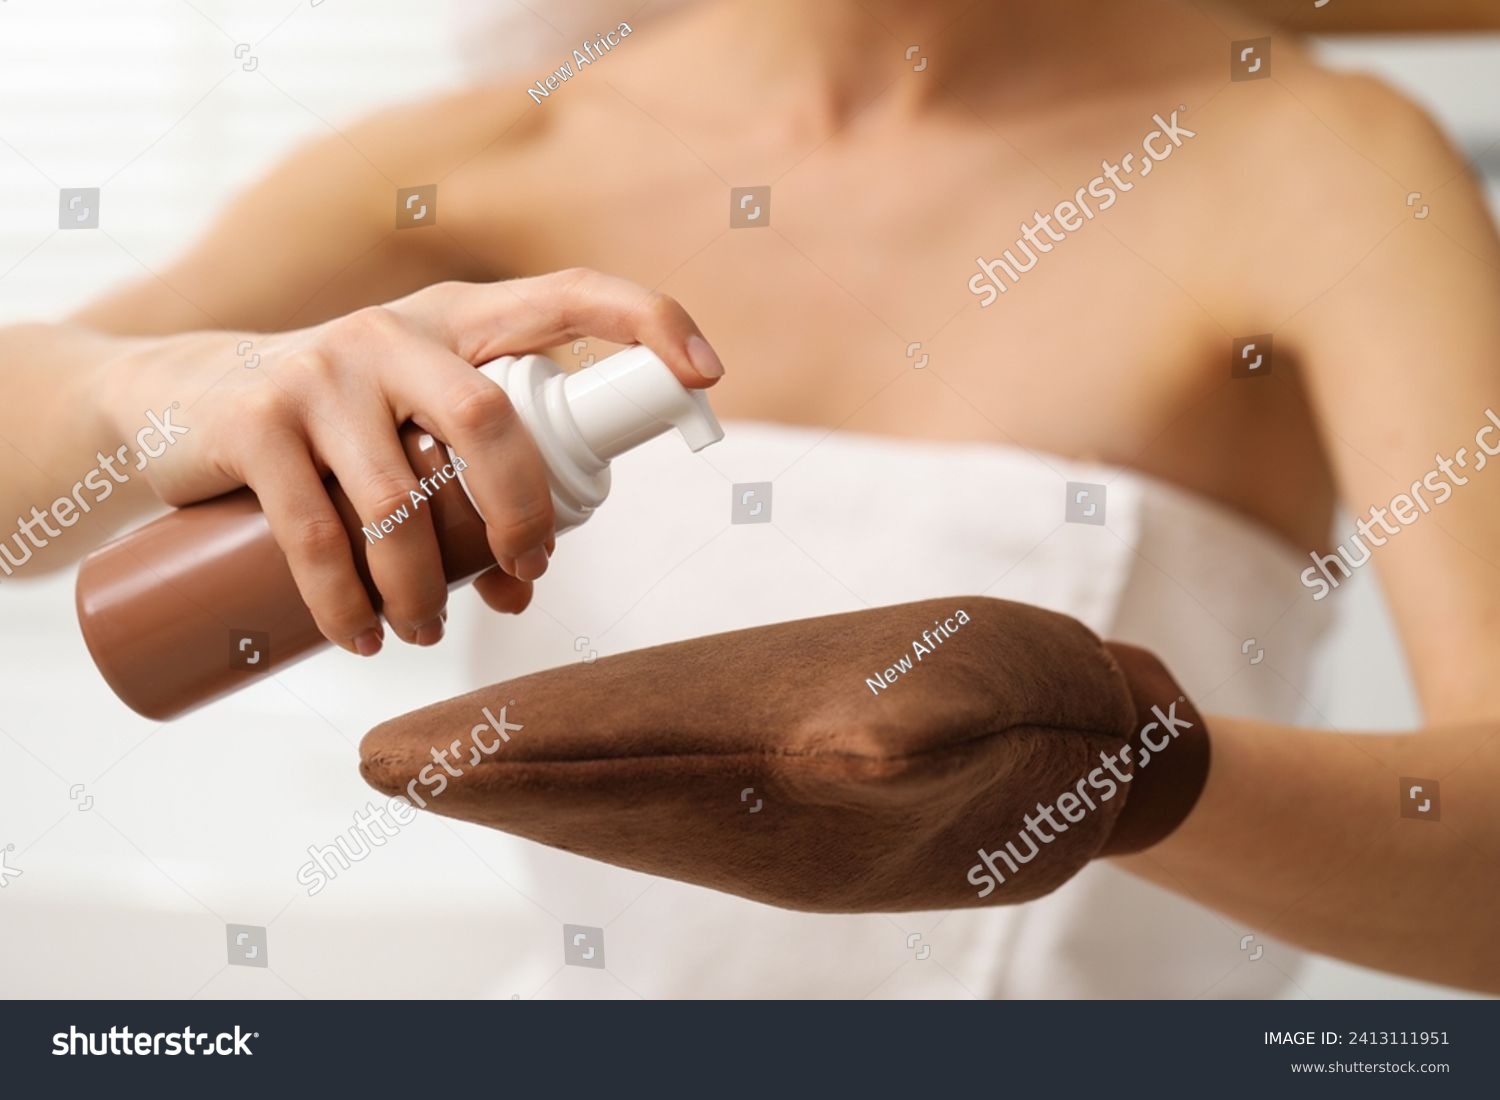 Self-tanning. Woman applying cosmetic product onto tanning mitt indoors, closeup #2413111951